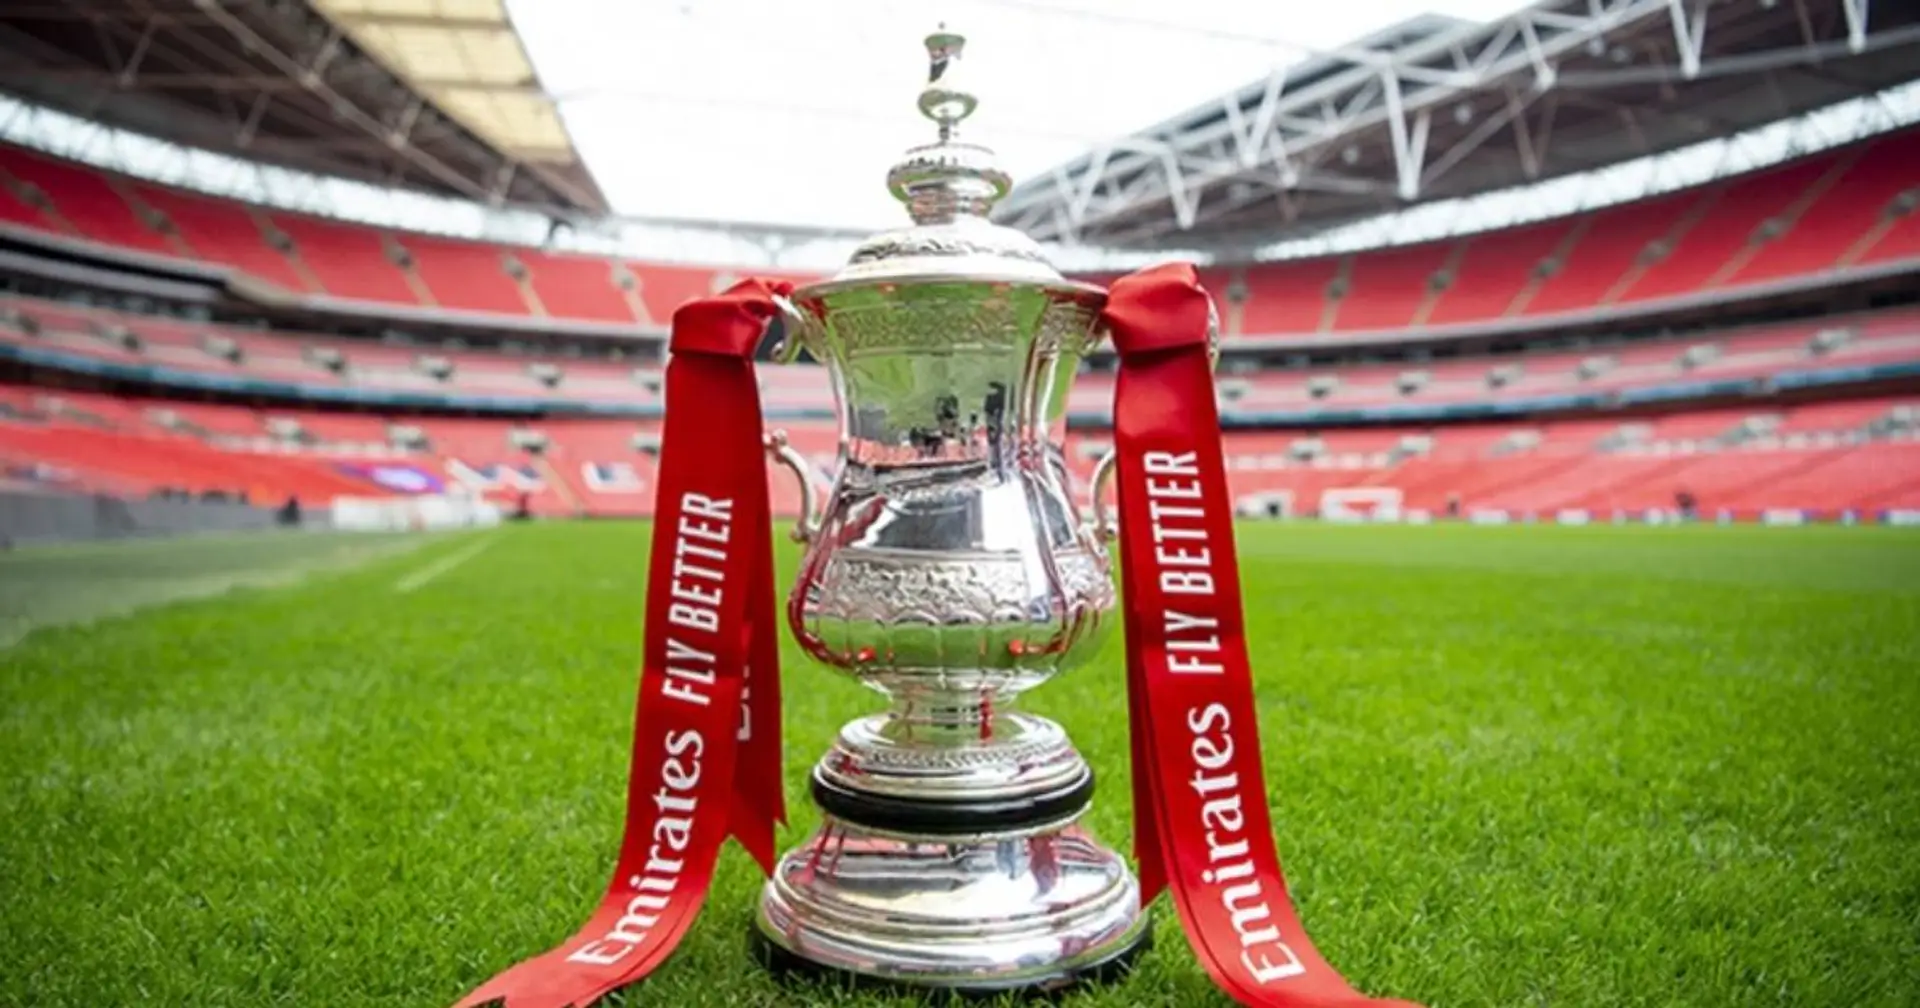 Referee confirmed for FA Cup final between Man United and Man City